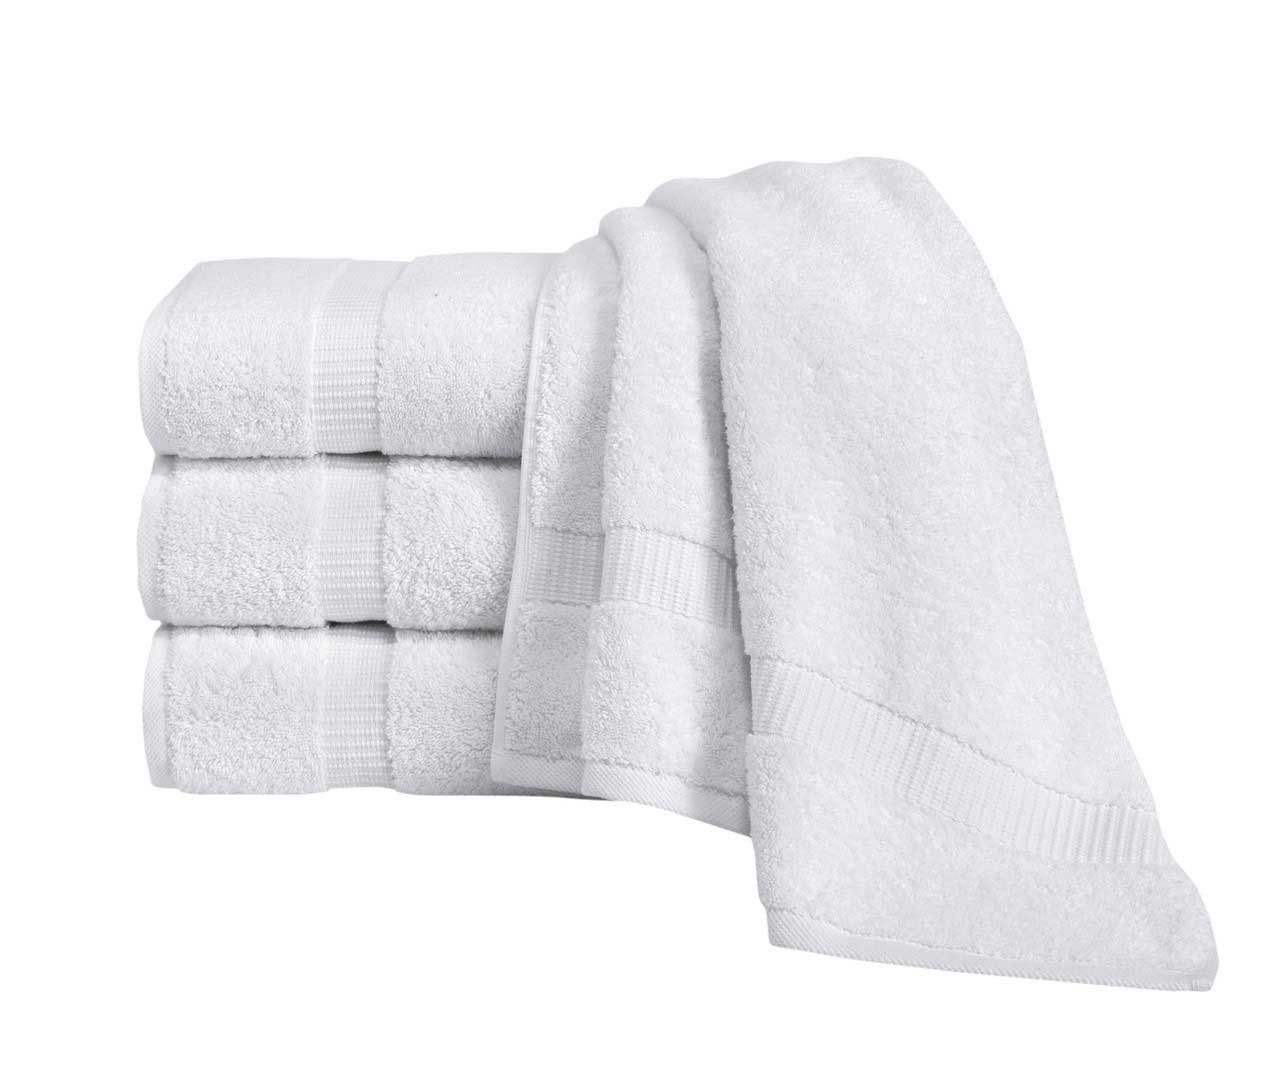 What is the GSM of the bath towels in the White Royal Turkish Towels Villa Collection?